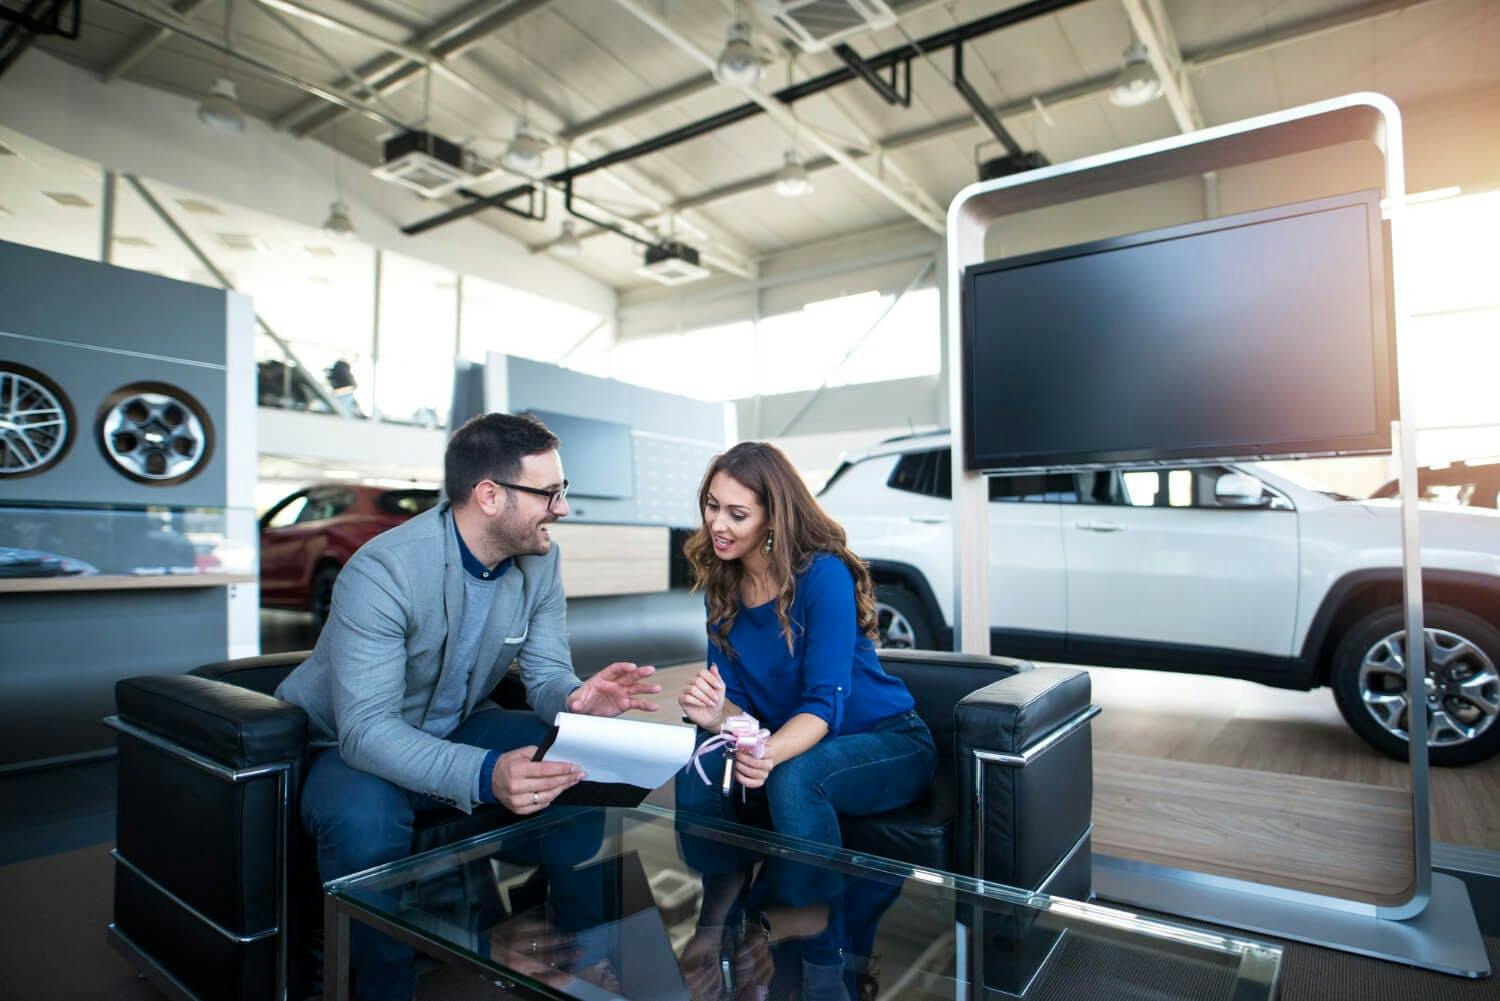 ScreenCloud Article - The Guide to Digital Signage for Car Showrooms